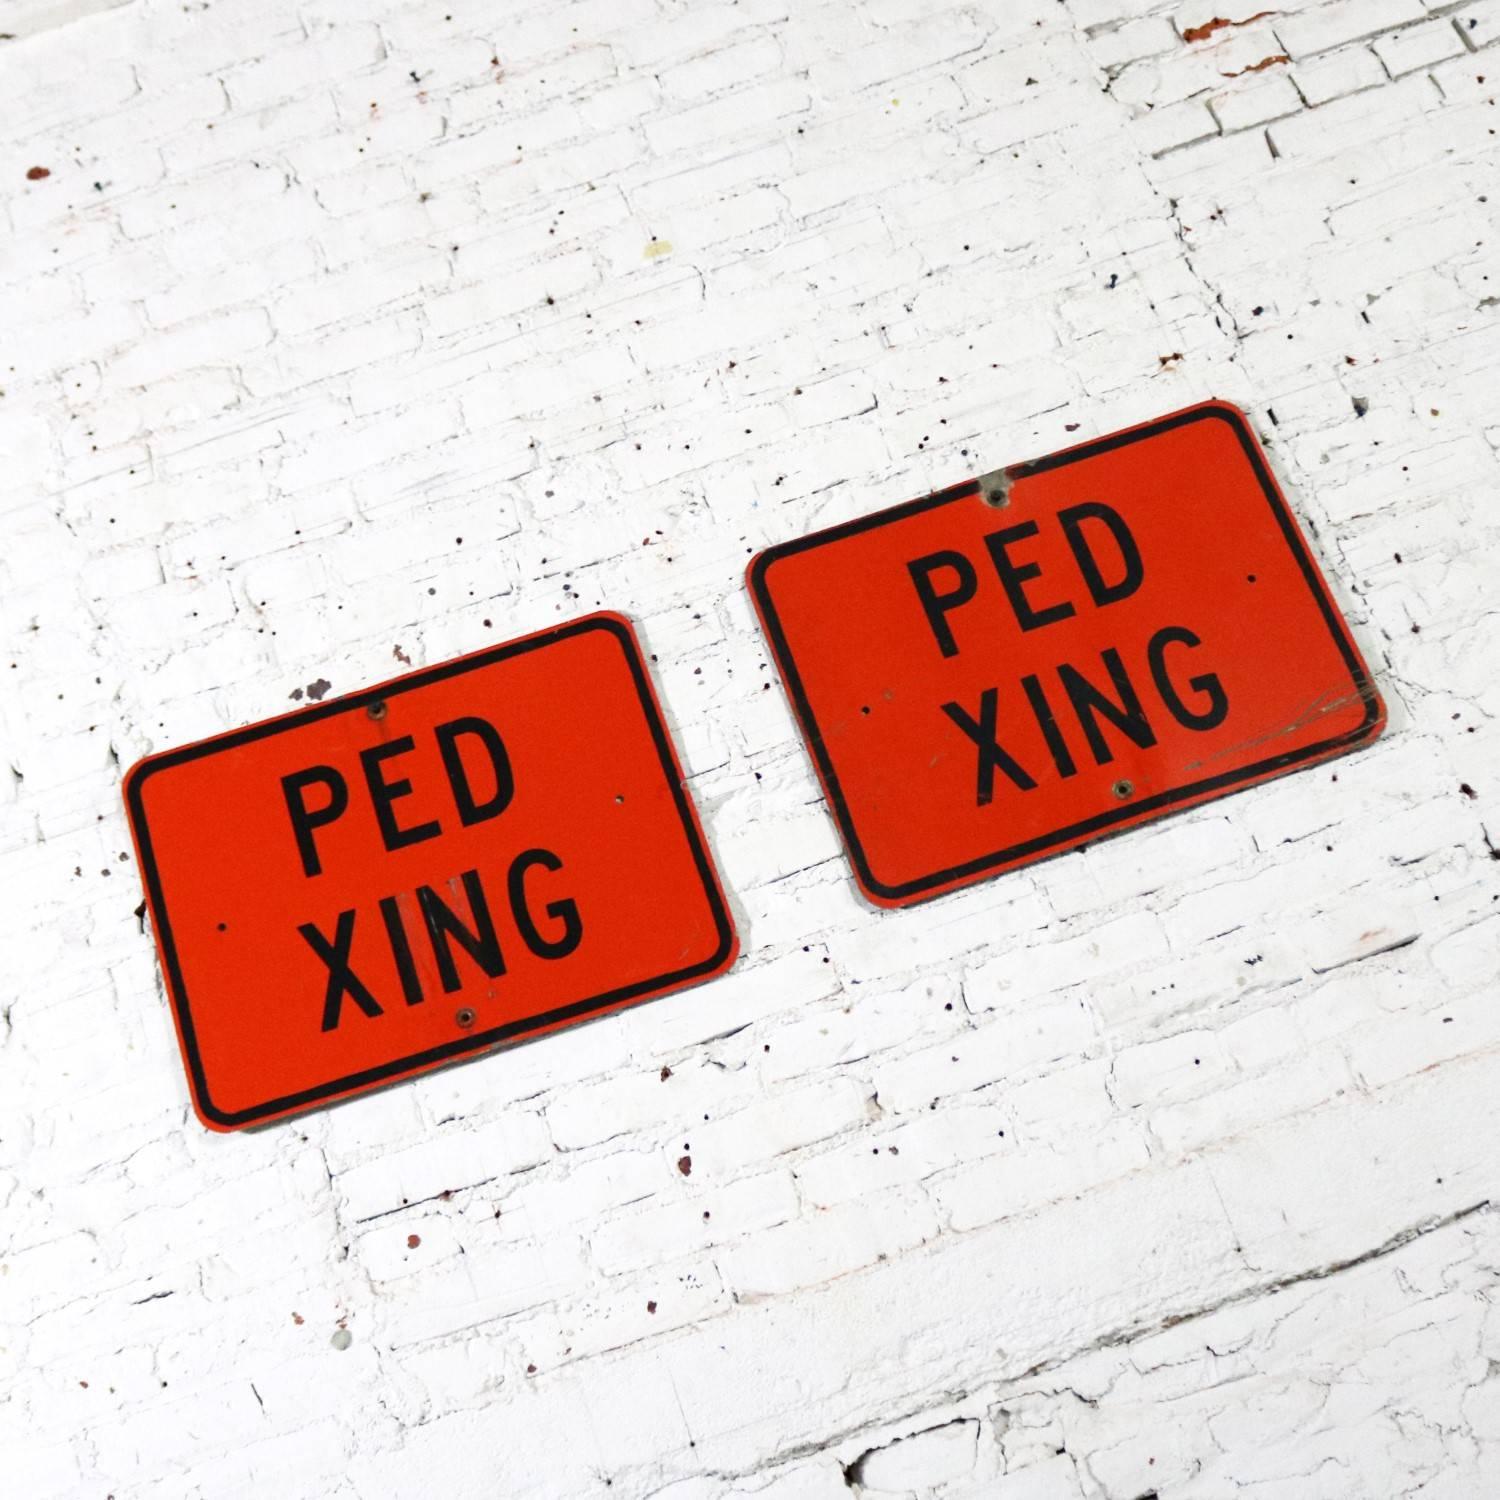 Cool vintage Ped Xing aluminium metal traffic signs in florescent orange. There are a pair, but we have priced them separately. They are in excellent vintage condition with just the right amount of age and use patina. Please see photos, circa 20th